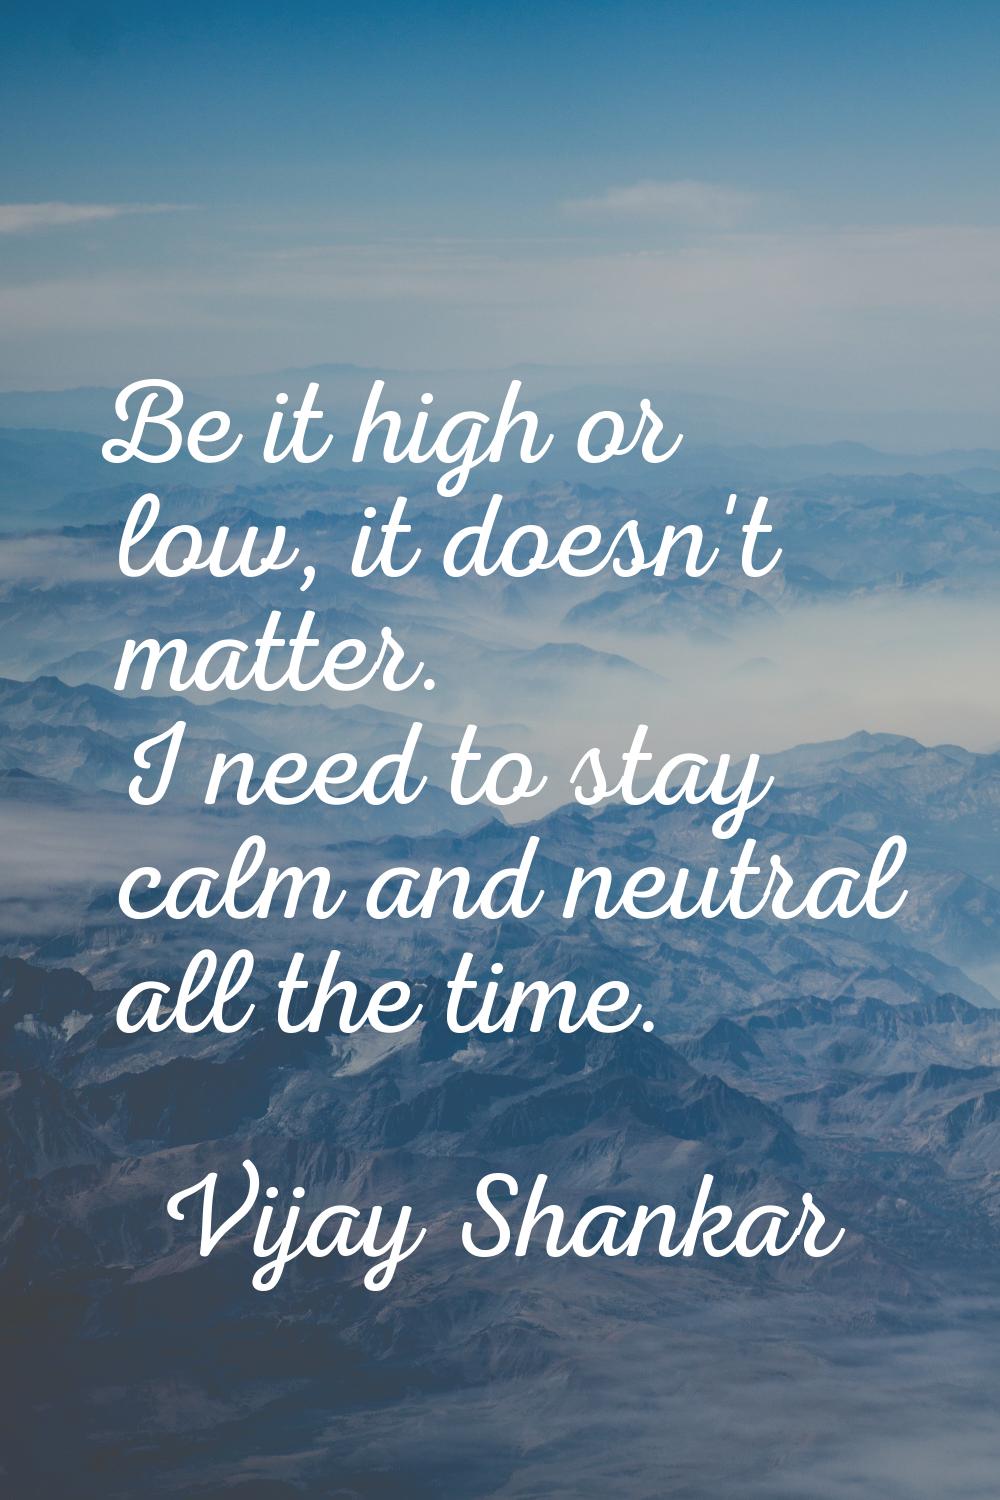 Be it high or low, it doesn't matter. I need to stay calm and neutral all the time.